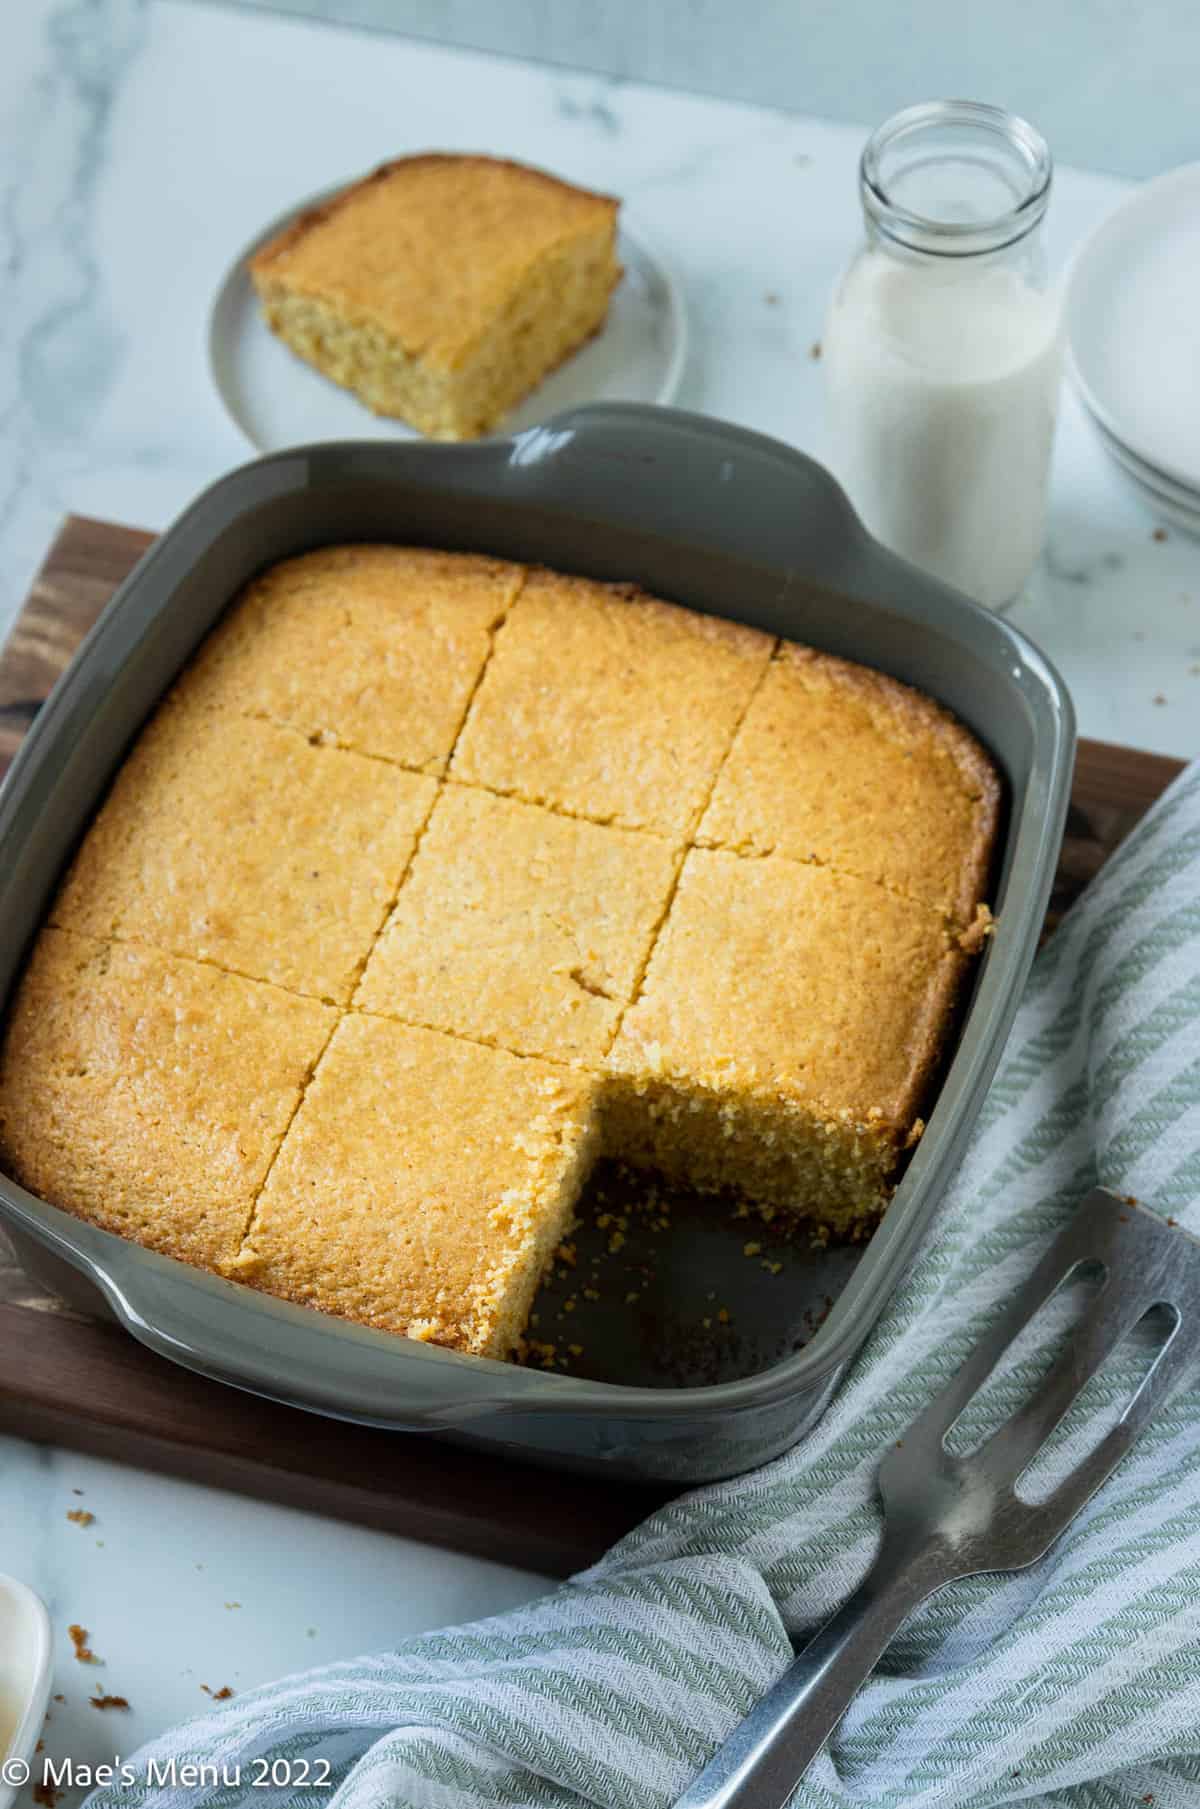 Sliced loaf of cornbread made without milk in a grey pan with a slice taken out of it.